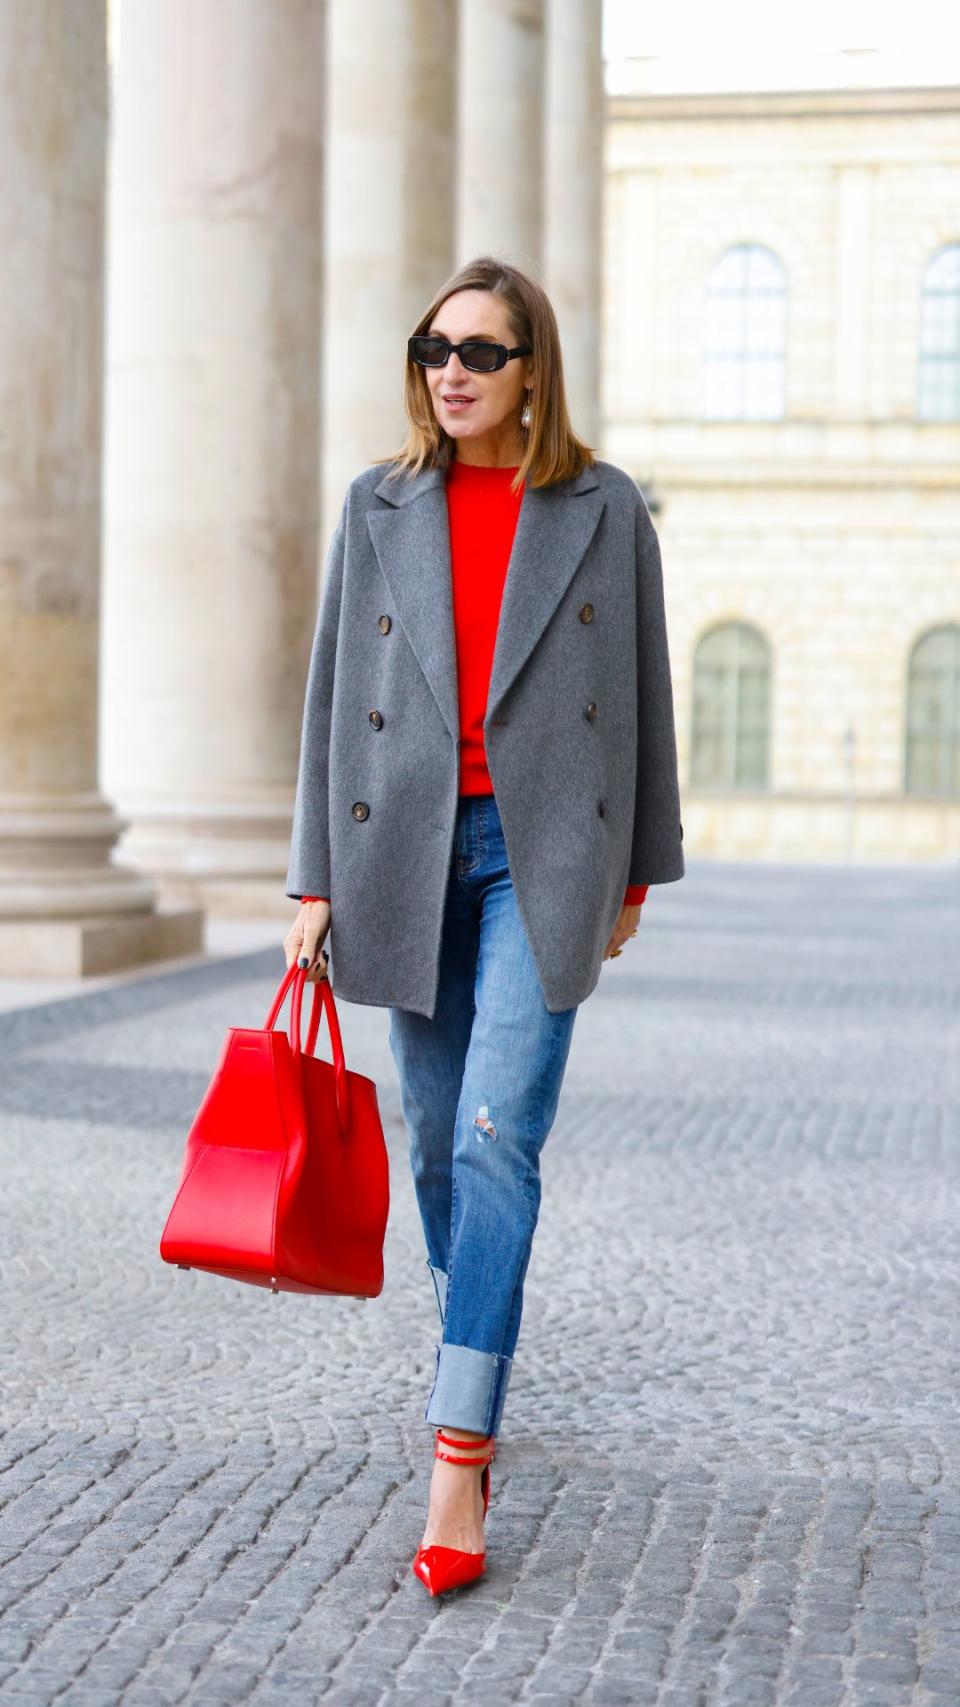 <p> Who said wearing jeans seven days a week has to be boring? This look is proof that jeans and a blazer are a trustworthy style to rely on. Dress it up with a pop of colour and pair a well-fitted pair of slim-leg jeans with a bright pop of red, match your jumper with the same shade of heels and bag and tie it all together with a grey woolly blazer. Now this is chic. </p>